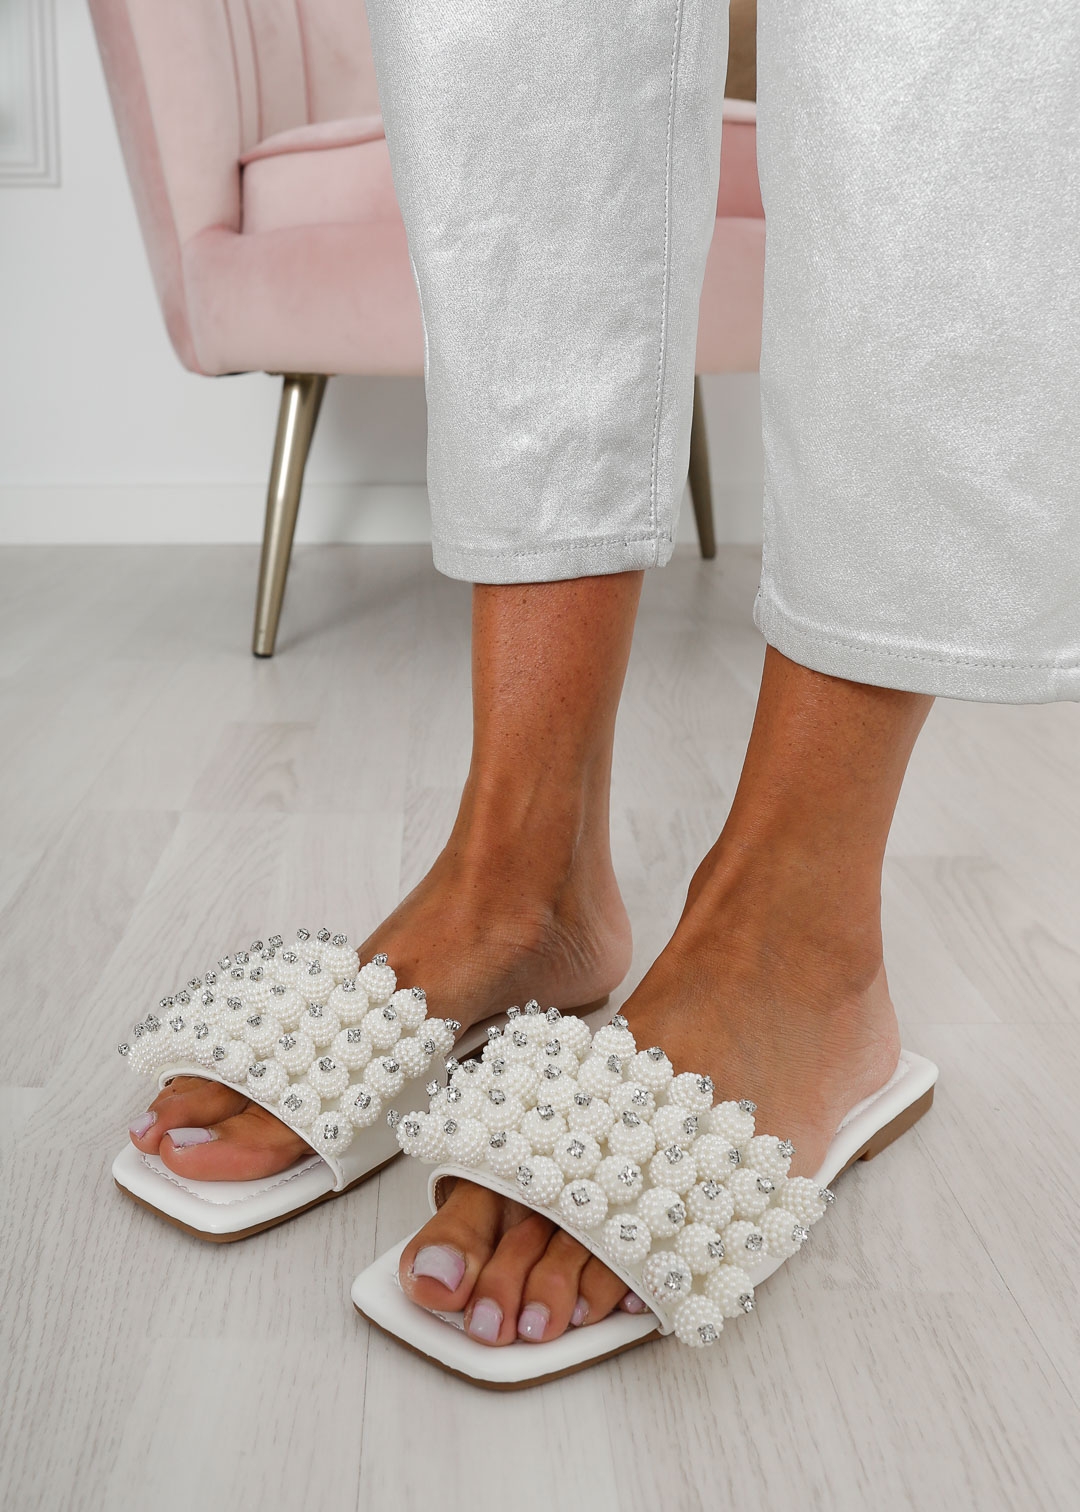 WHITE SANDALS WITH PEARLS